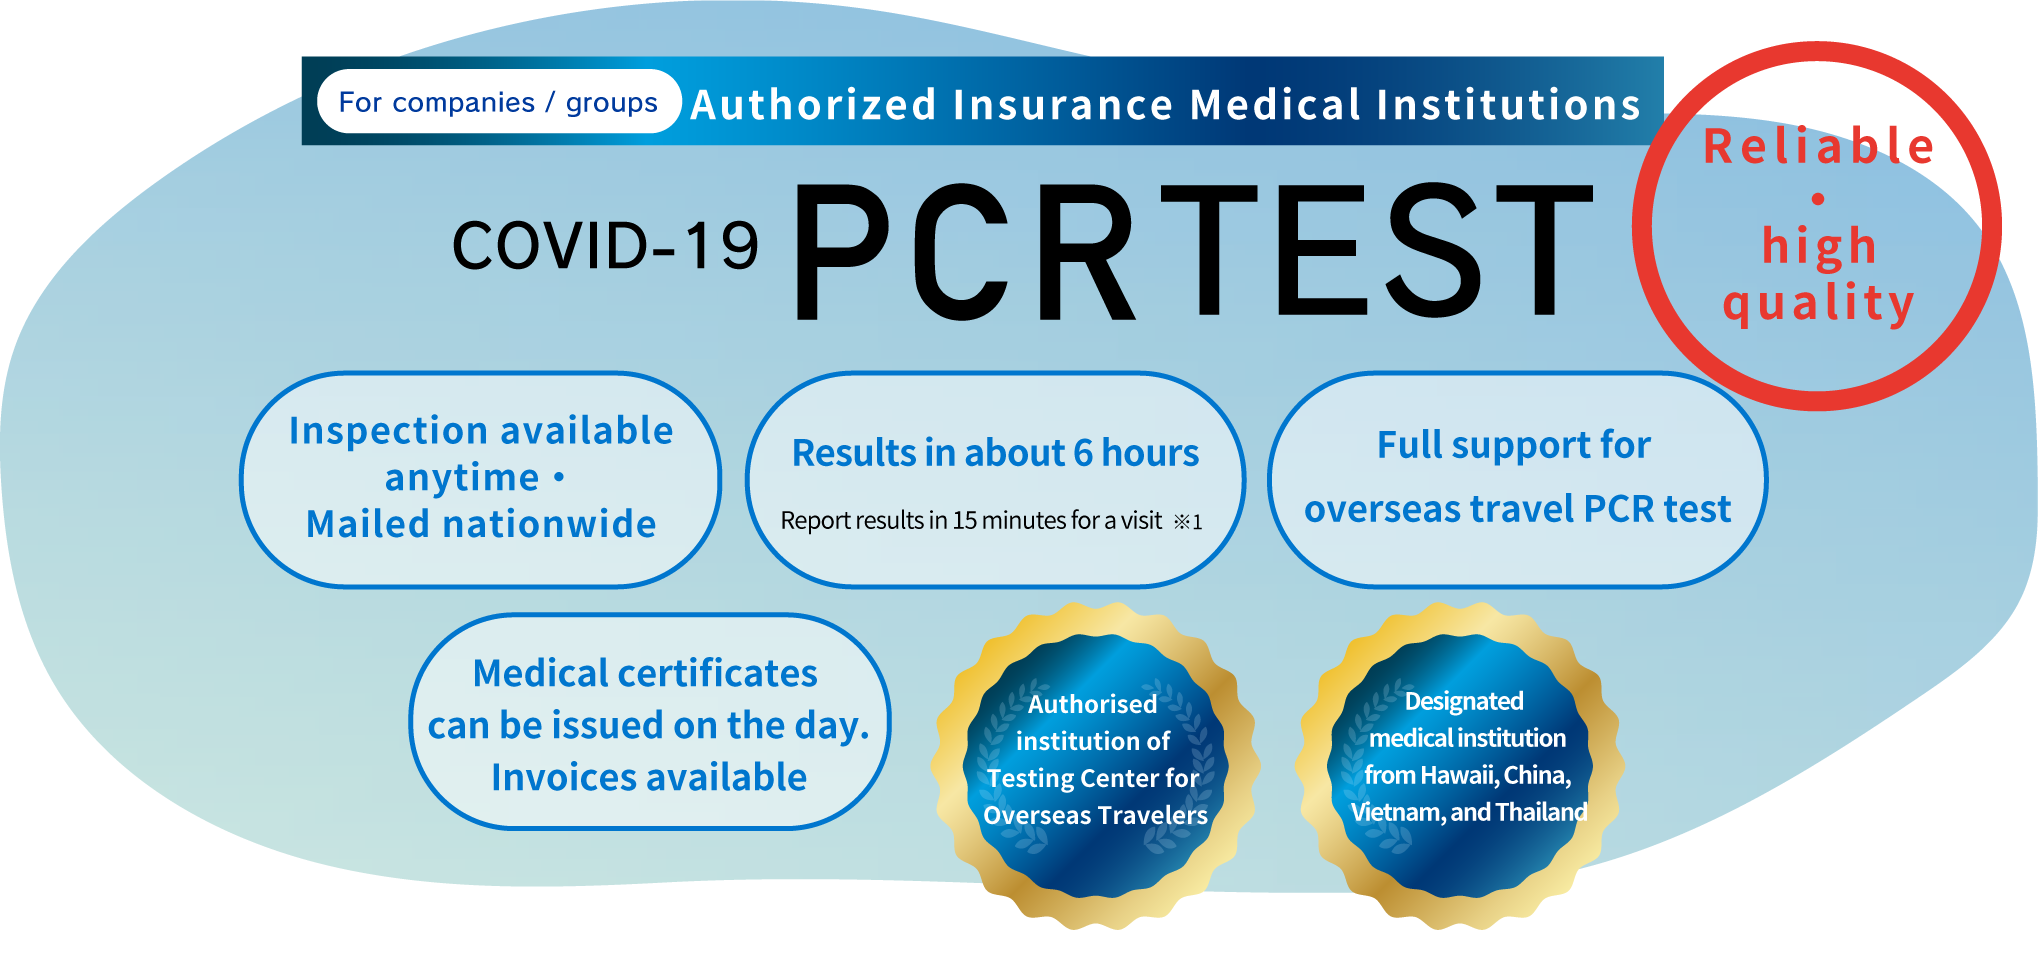 For companies and groups. Authorized Insurance Medical Institutions COVID-19 PCR test | CLINIC FOR